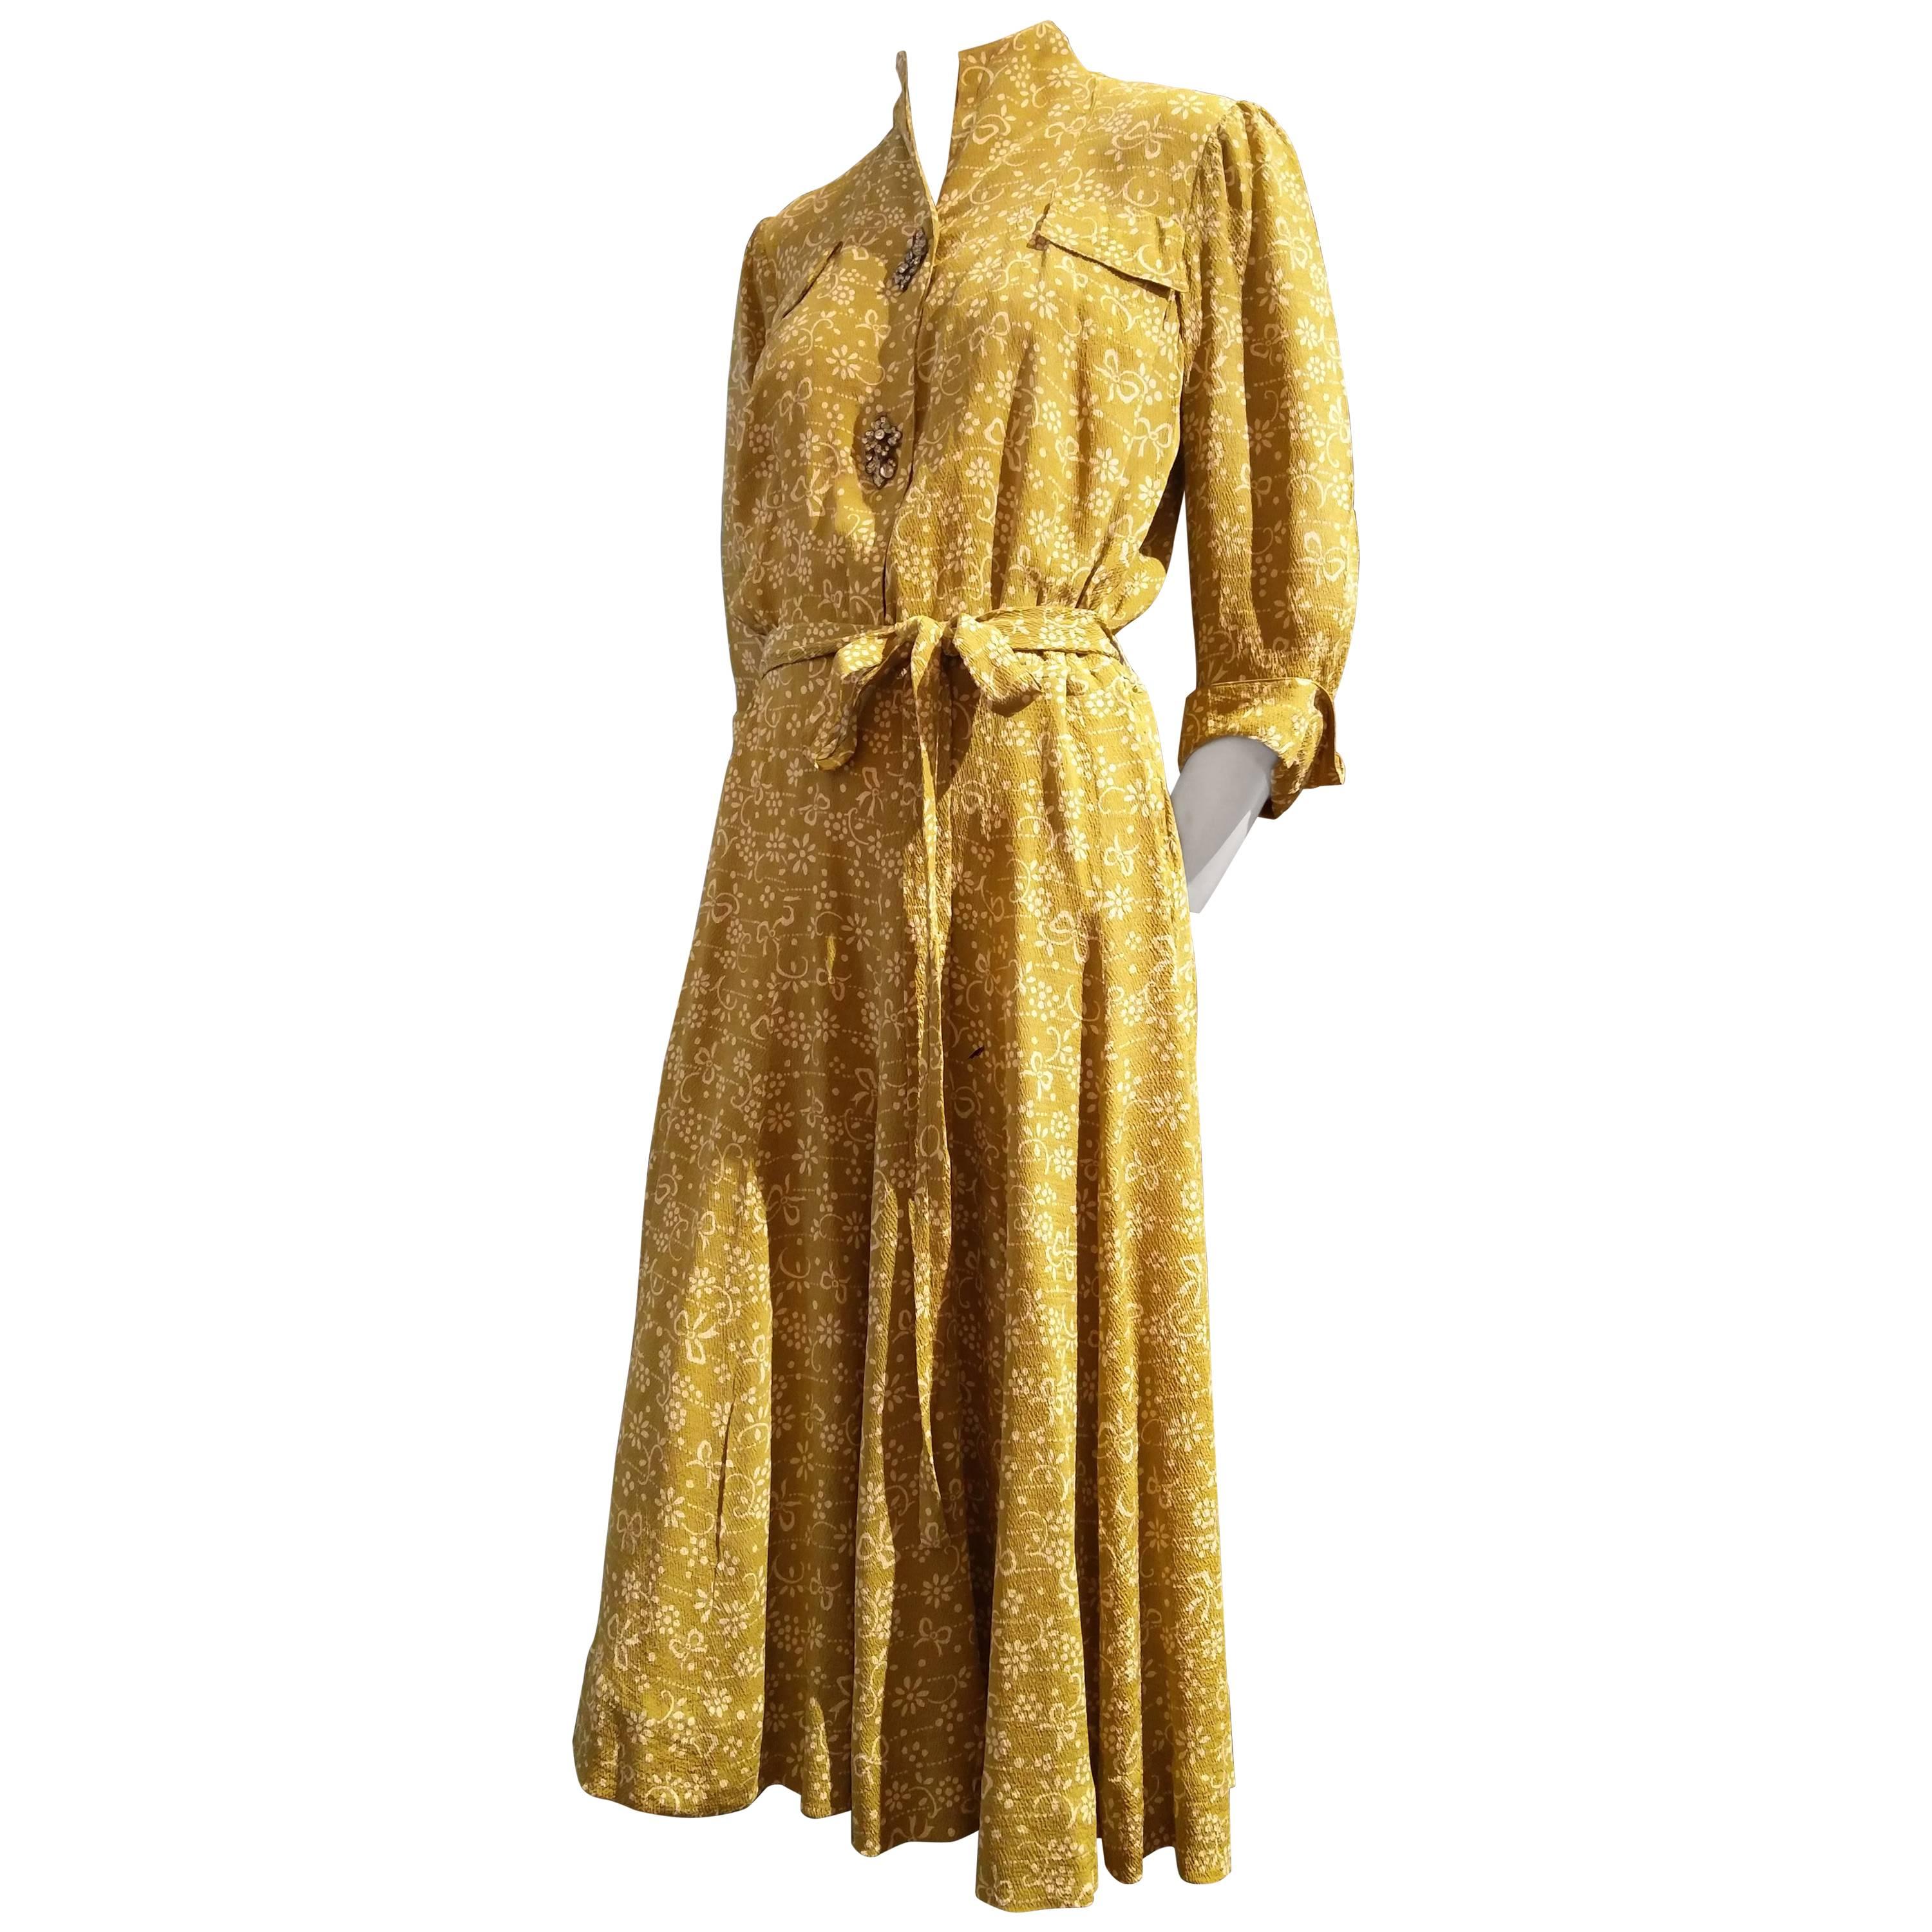 1940s Eisenberg and Sons Gold Floral Print Silk Crepe Dress w/ Original Buttons